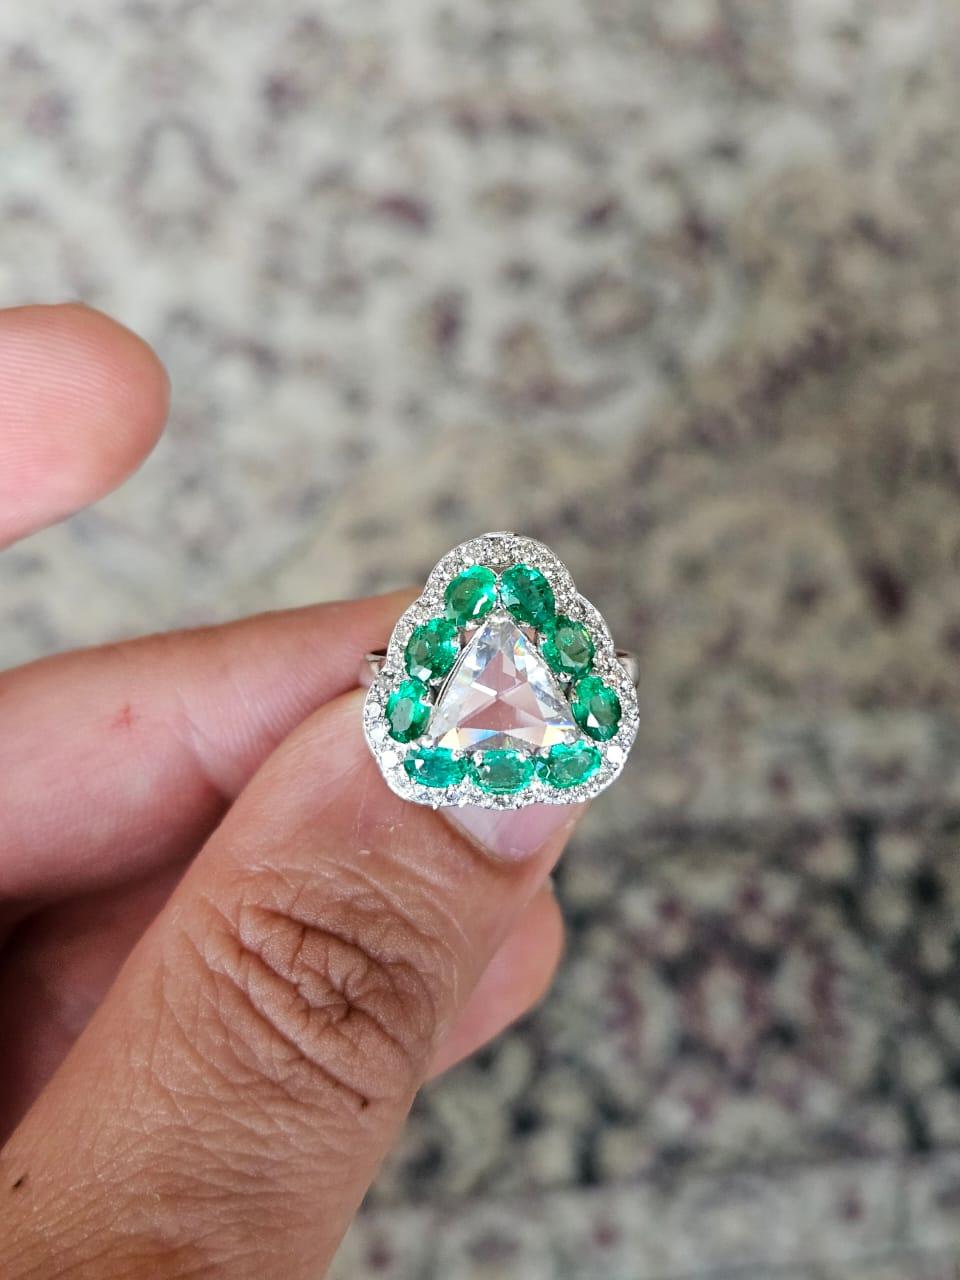 A very gorgeous and beautiful, art deco style, Emerald & Rose Cut Diamond Engagement Ring set in 18K White Gold. The weight of the Emeralds is 1.31 carats. The Emeralds are completely natural, without any treatment and are of Zambian origin. The